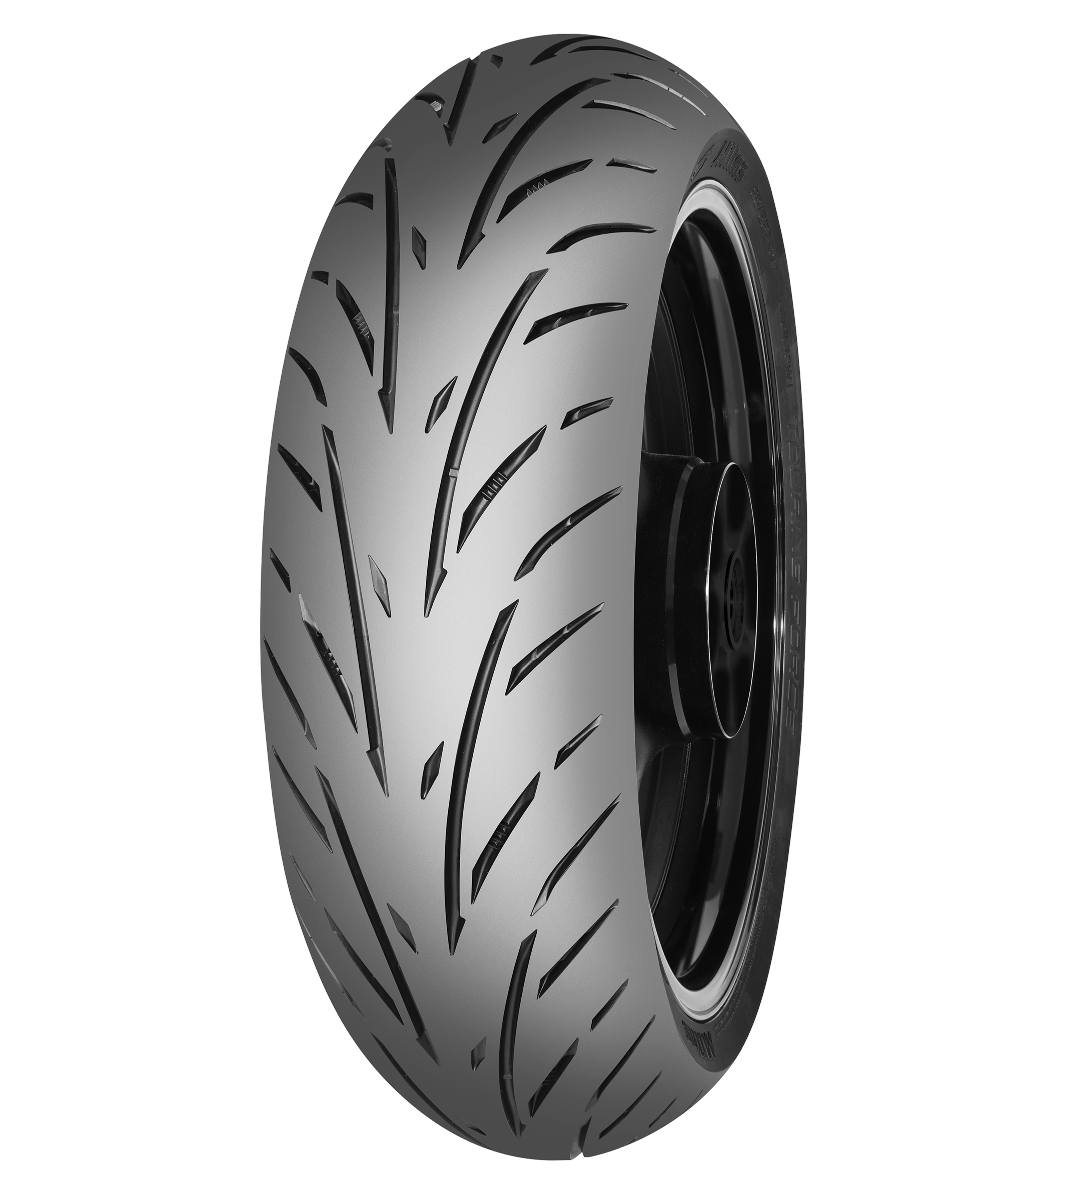 Mitas TOURING FORCE 150/70ZR17 Trail ON Trail (69W) No Stripe Tubeless Rear Tire, 608380, 150/70ZR17, Rear, Touring-Force, Trail, Trail ON, Tires - Imported and distributed in North &amp; South America by Lindeco Genuine Powersports - Premier Powersports Equipment and Accessories for Motorcycle Enthusiasts, Professional Riders and Dealers.